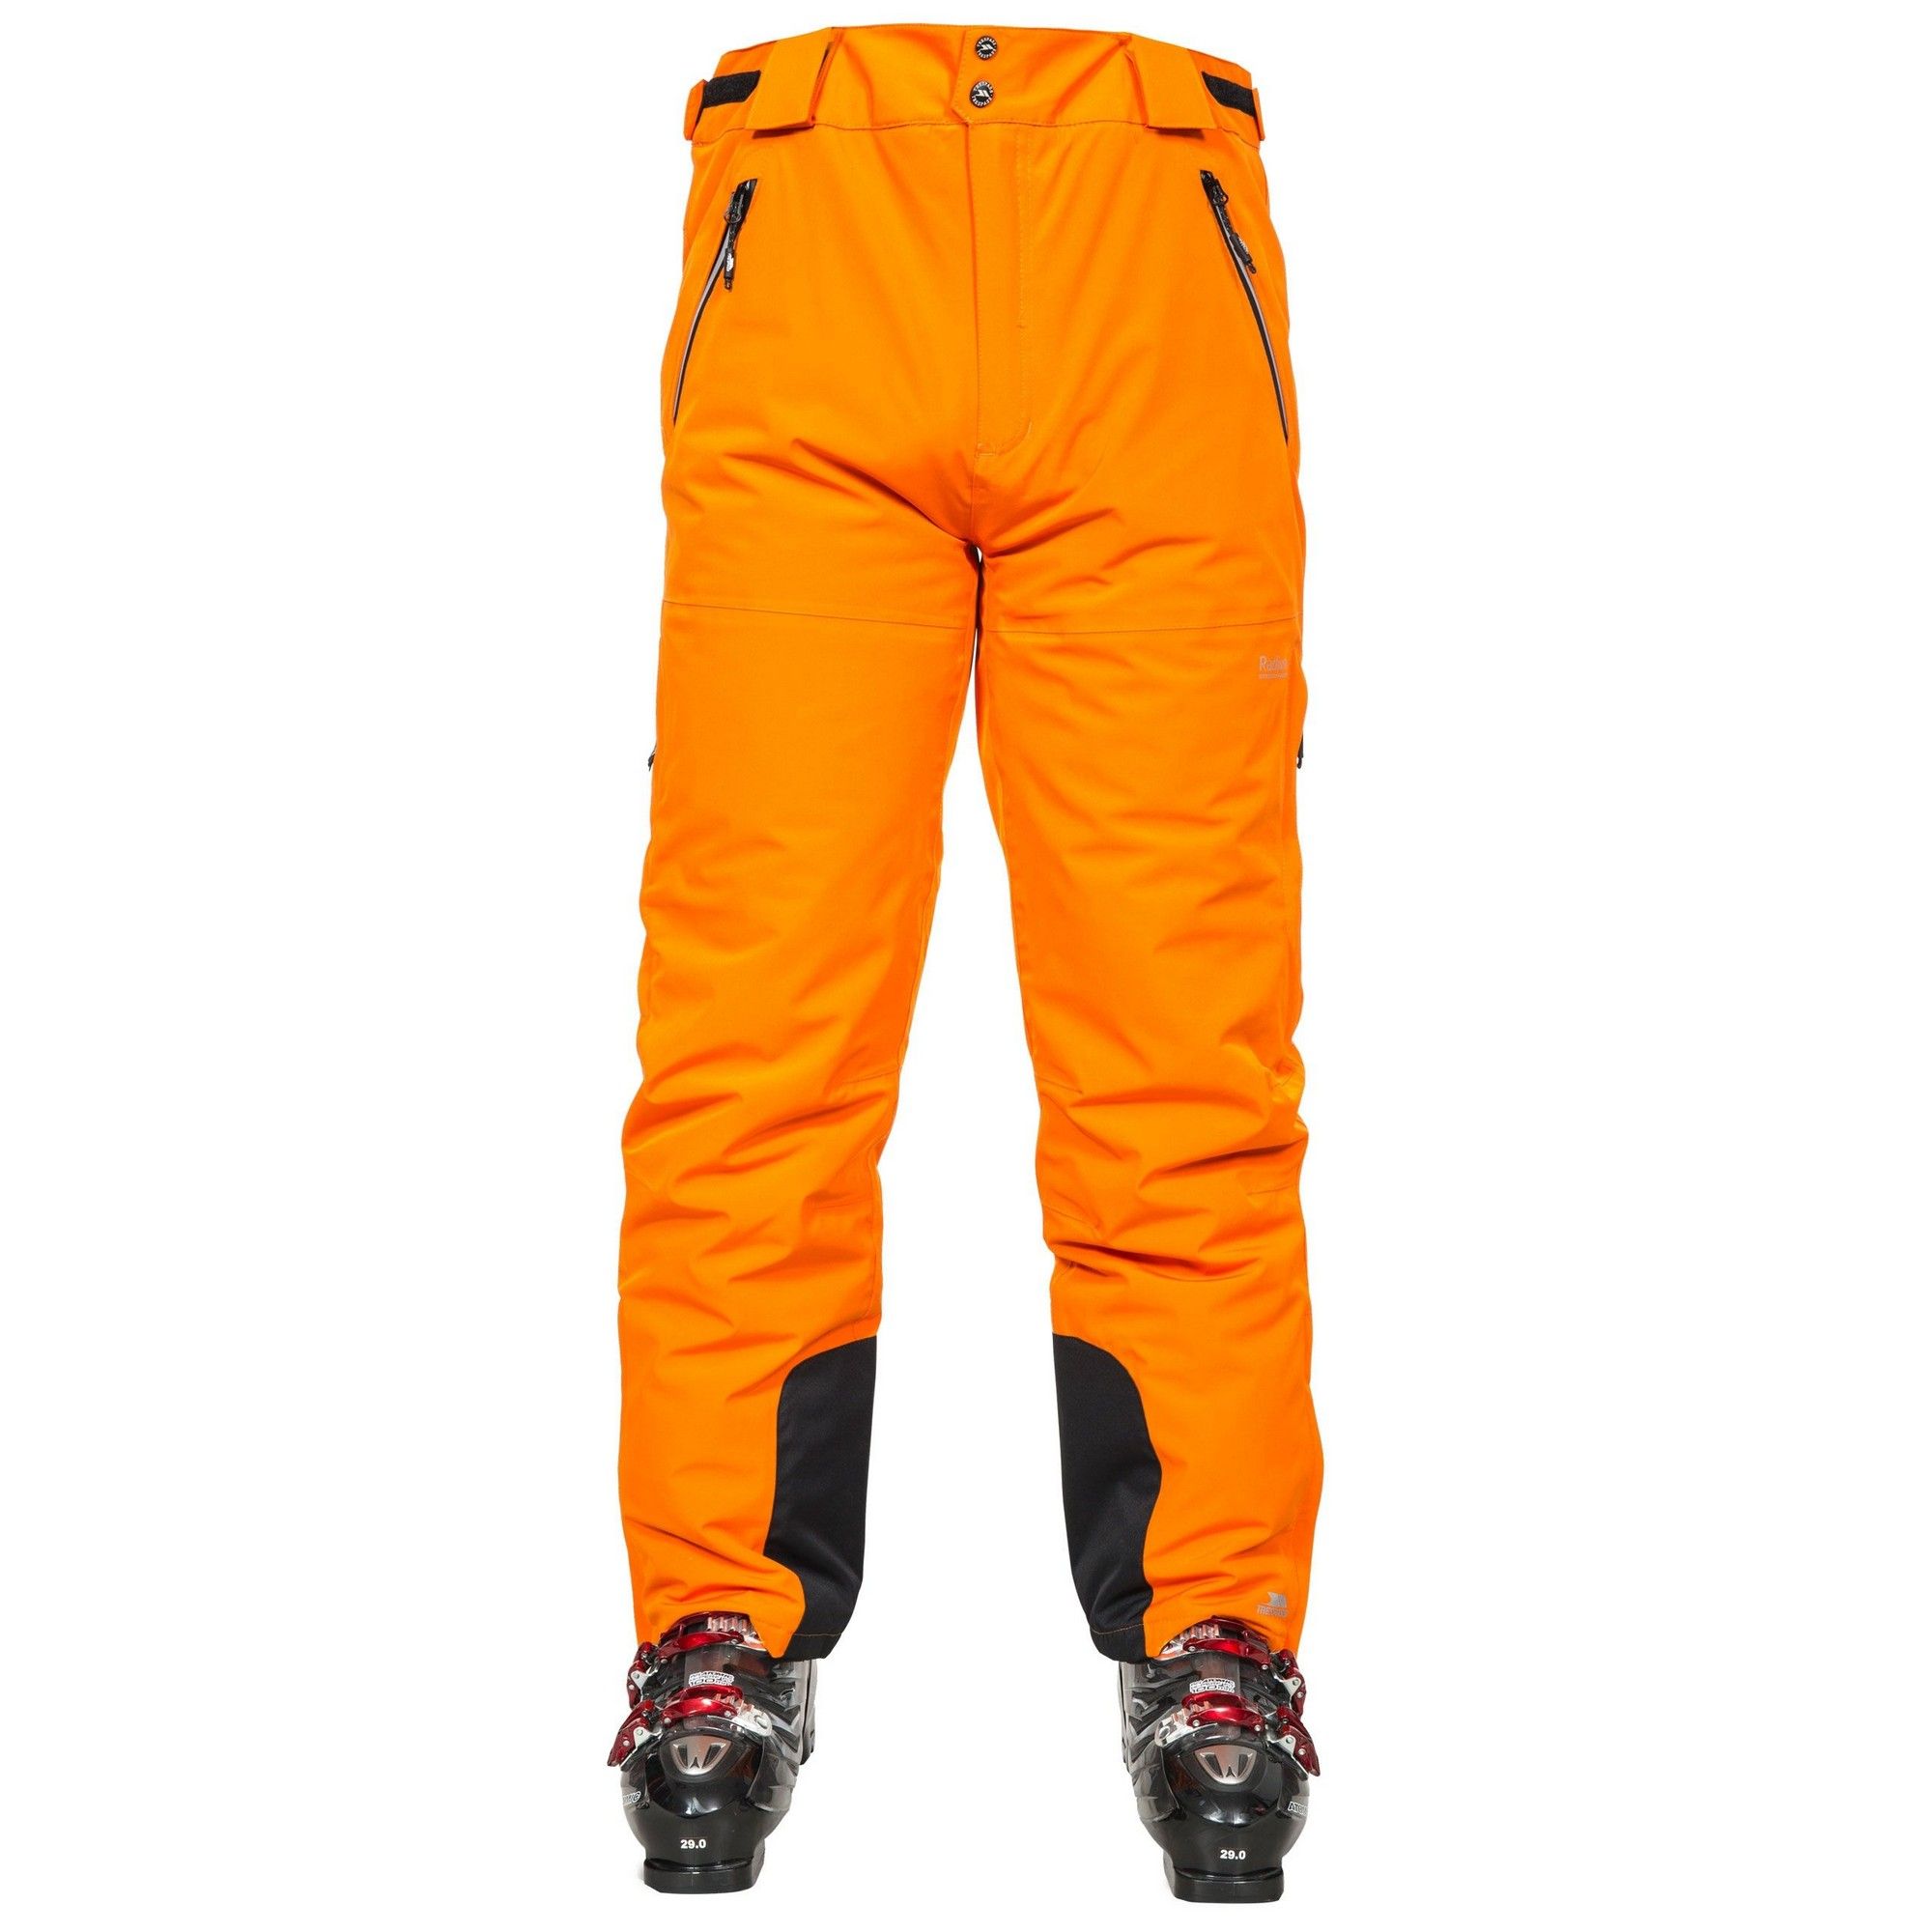 Lightly padded. Microfleece at seat and knees. 3 water repellent zip pockets. Detachable braces. Side leg ventilation zips. Side leg ankle zip with facing. Ankle gaiters. Articulated knees. Slim fit. Waterproof 10000mm, breathable 70000mvp, windproof, taped seams, Recco. Shell: 92% Polyester/8% Elastane, Lining: 100% Polyester, Filling: 100% Polyester. Trespass Mens Waist Sizing (approx): S - 32in/81cm, M - 34in/86cm, L - 36in/91.5cm, XL - 38in/96.5cm, XXL - 40in/101.5cm, 3XL - 42in/106.5cm.